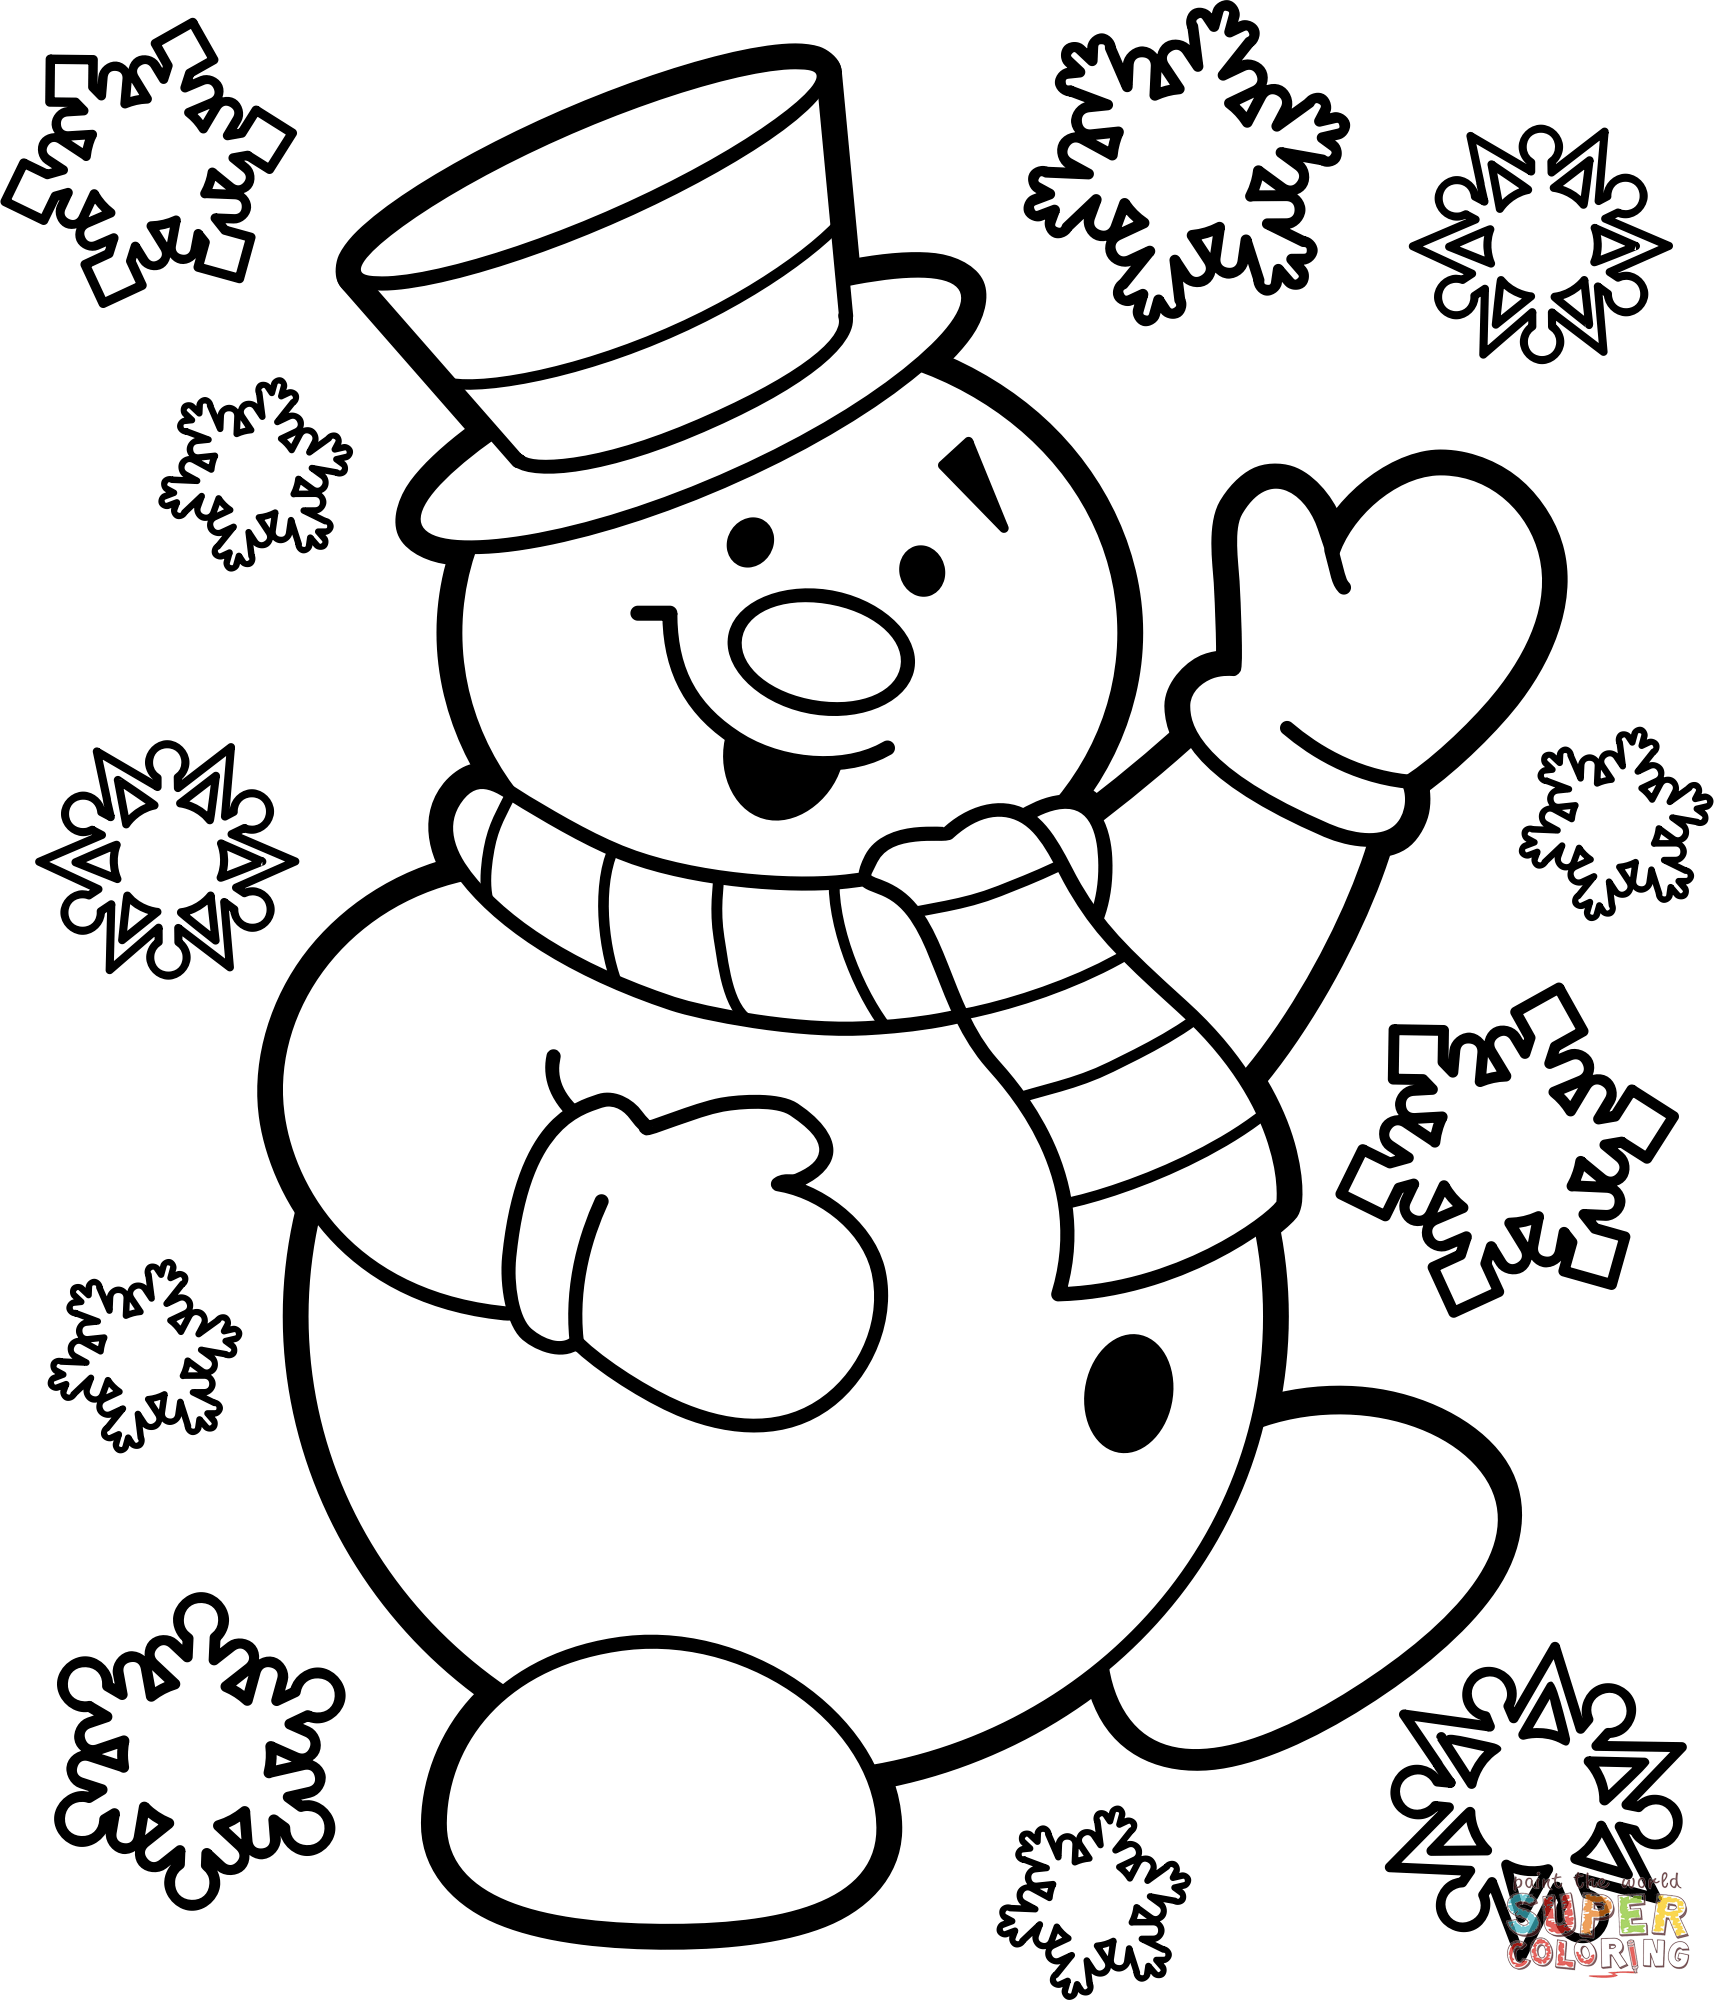 Christmas snowman coloring page free printable coloring pages